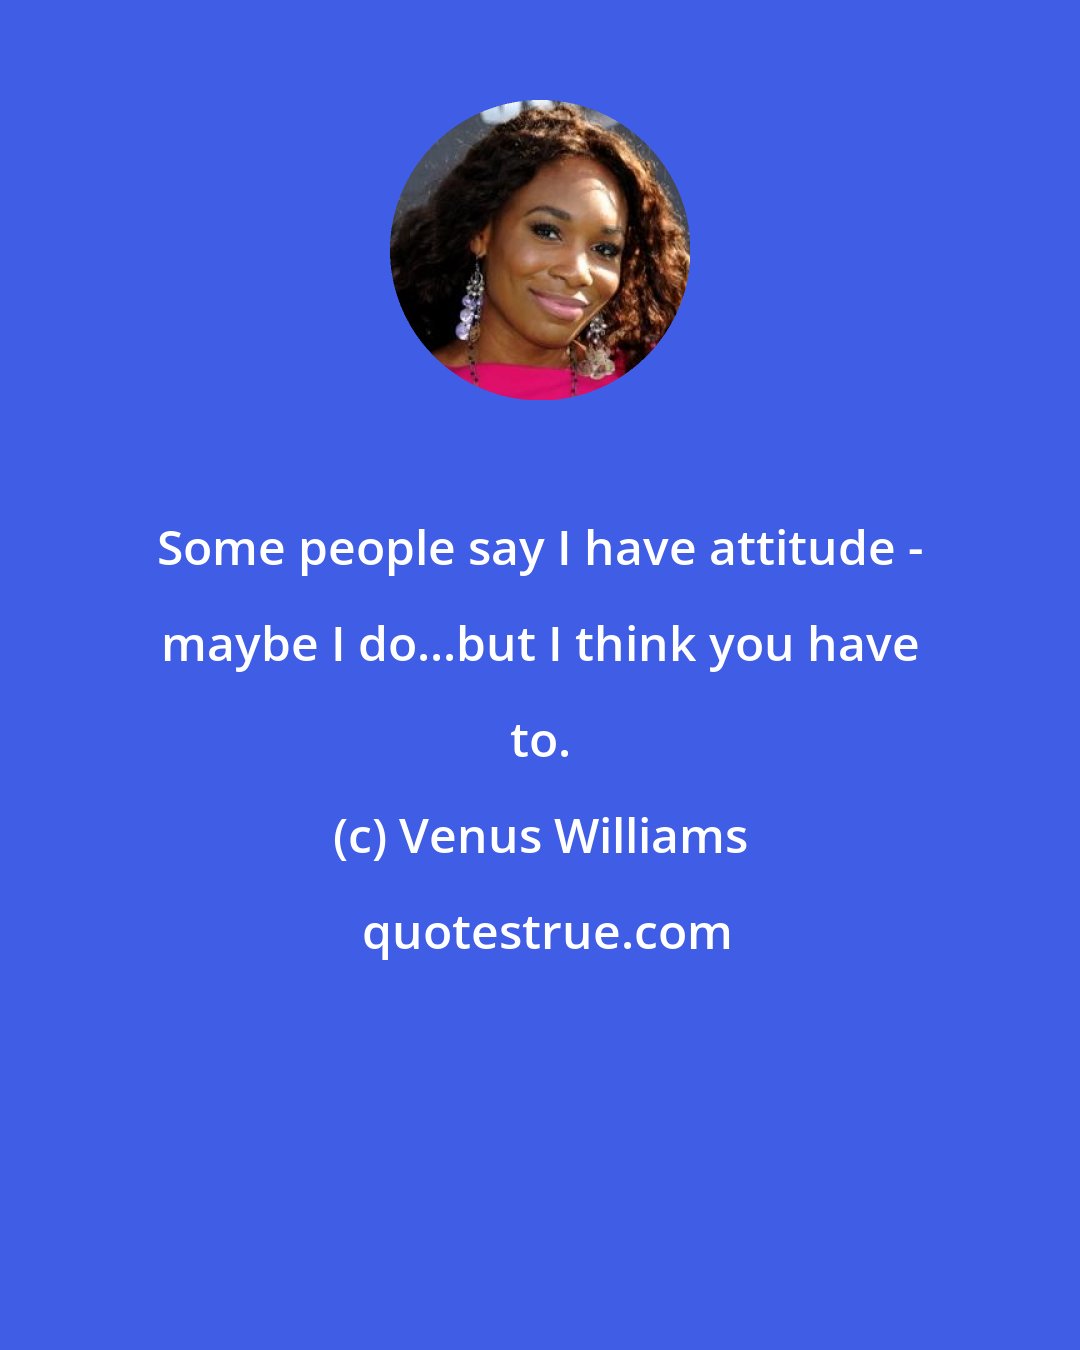 Venus Williams: Some people say I have attitude - maybe I do...but I think you have to.